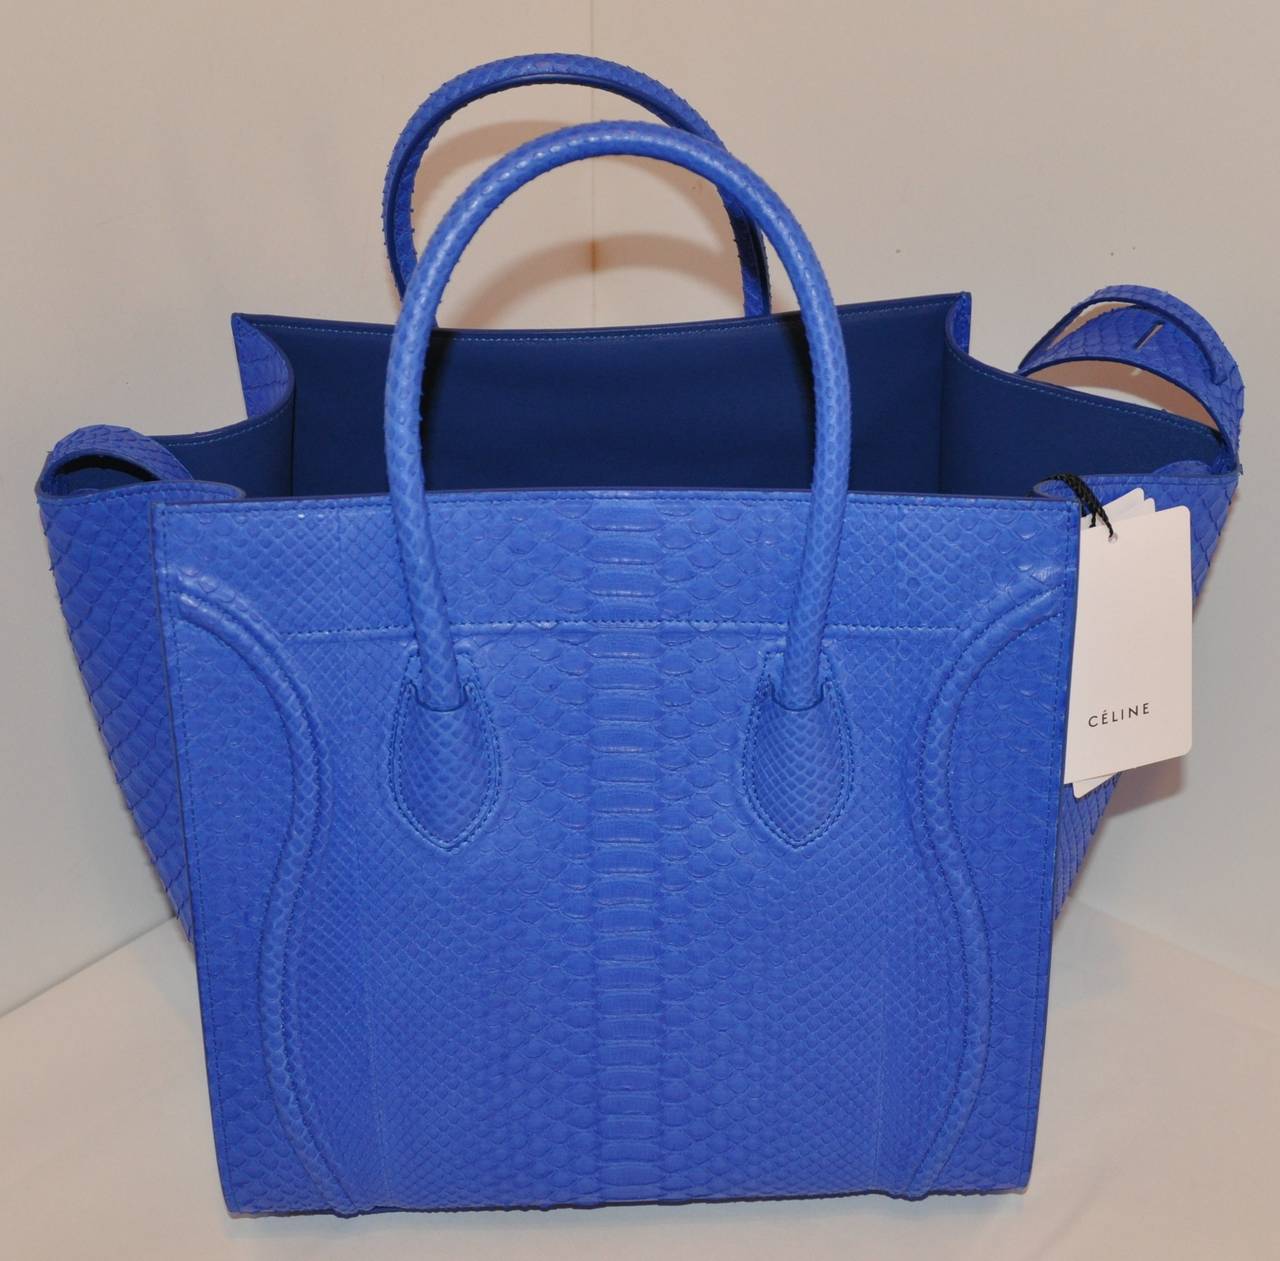 This wonderful rich and luxurious soft exotic pylon skin medium size Celine handbag is lined with soft lambskin accented with a zippered compartment with attached 3.5